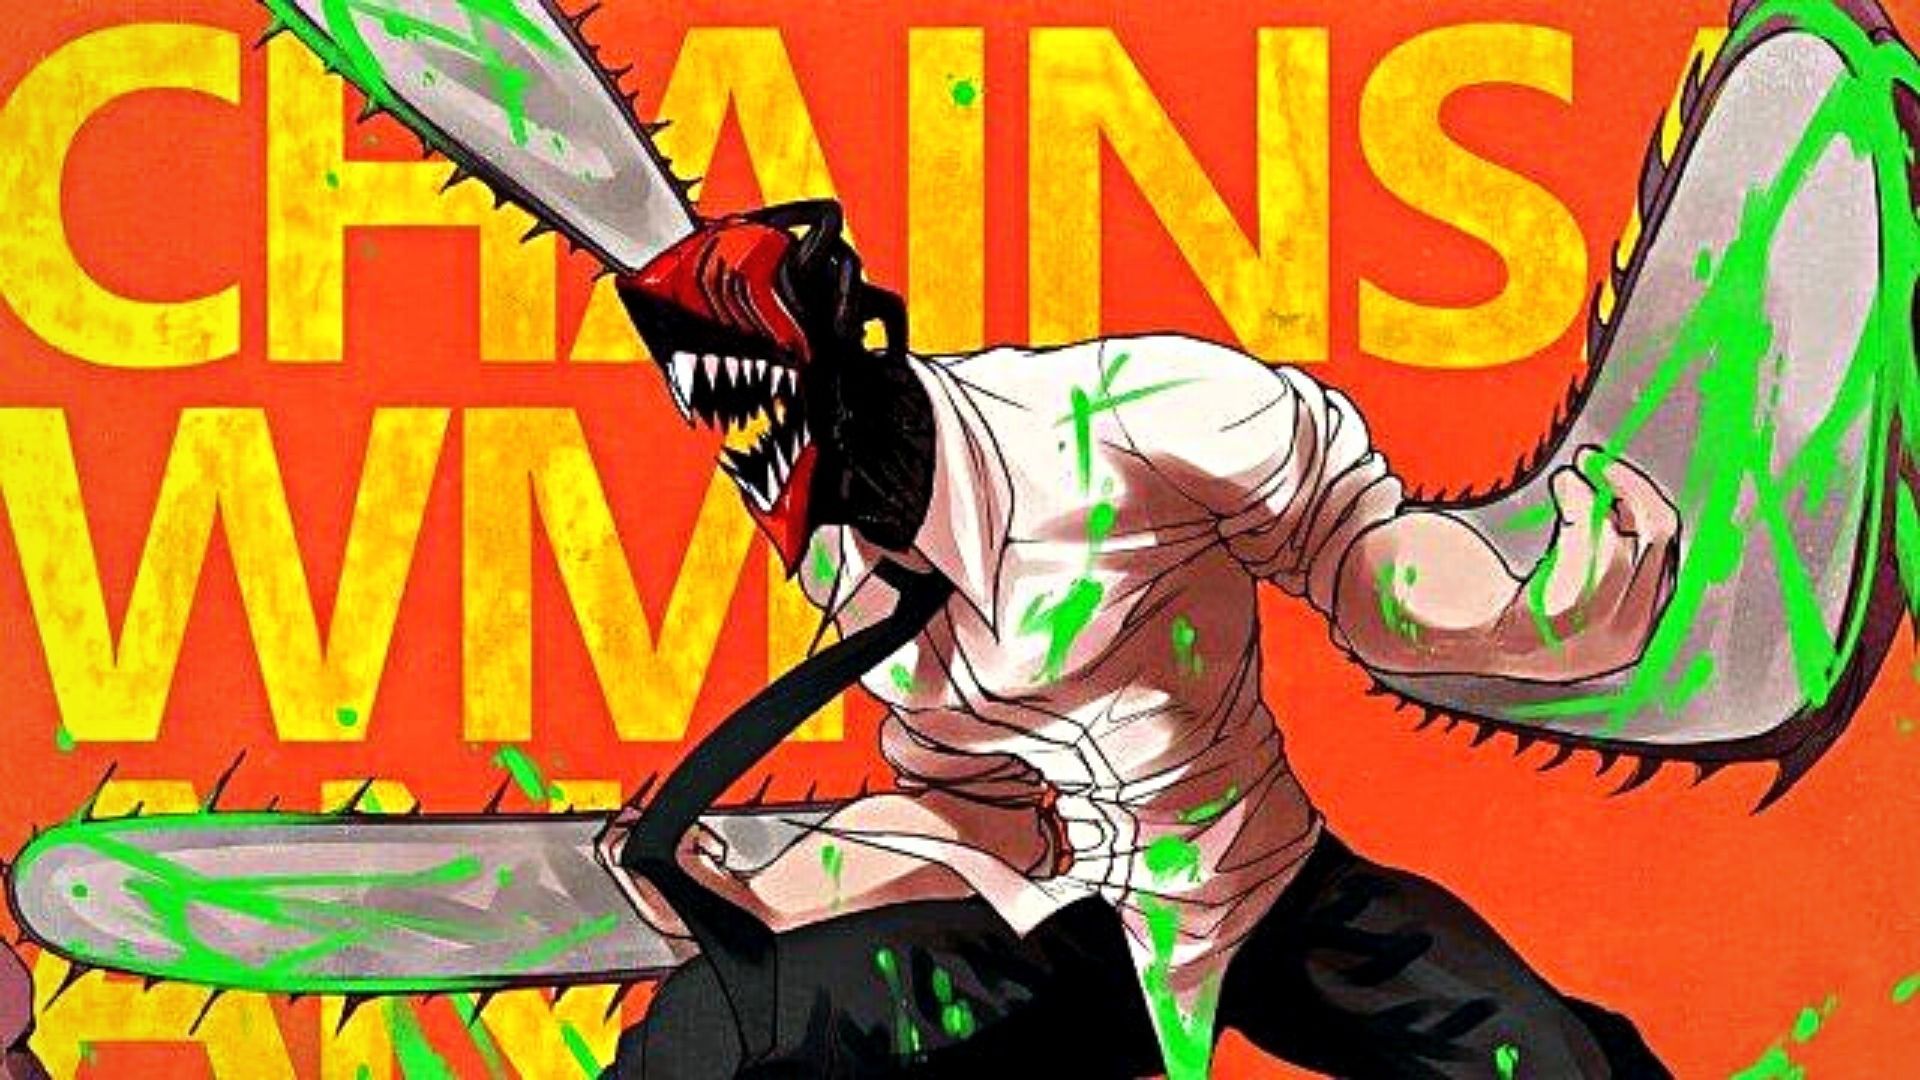 Chainsaw Man anime trailer 2 reveal THIS week - Time, date and